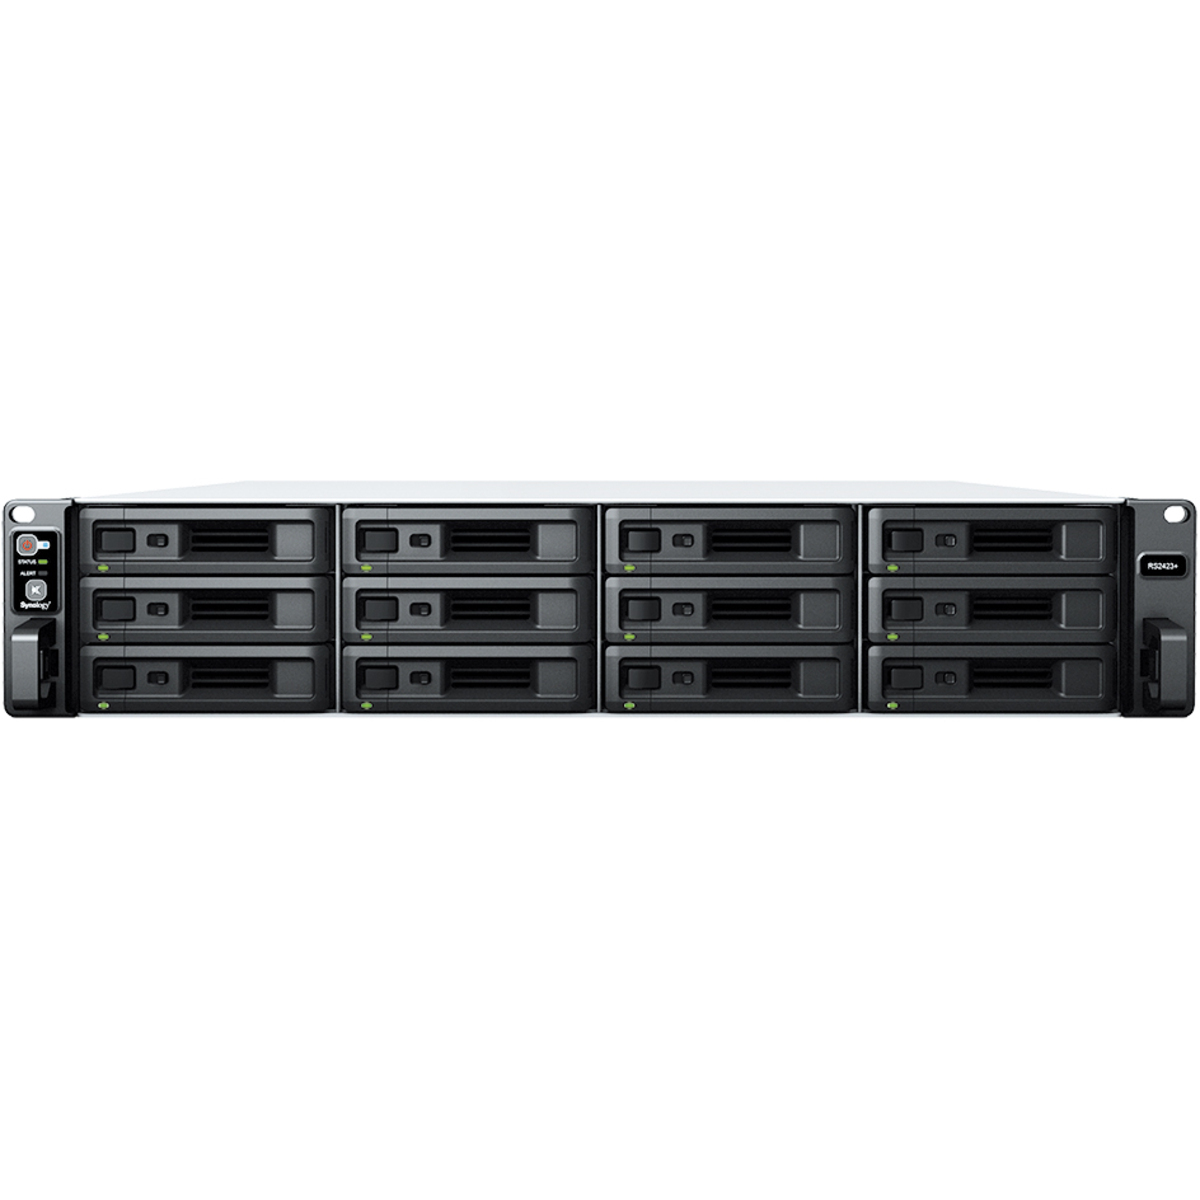 Synology RackStation RS2423RP+ RackMount 12-Bay Multimedia / Power User / Business NAS - Network Attached Storage Device Burn-In Tested Configurations - FREE RAM UPGRADE RackStation RS2423RP+